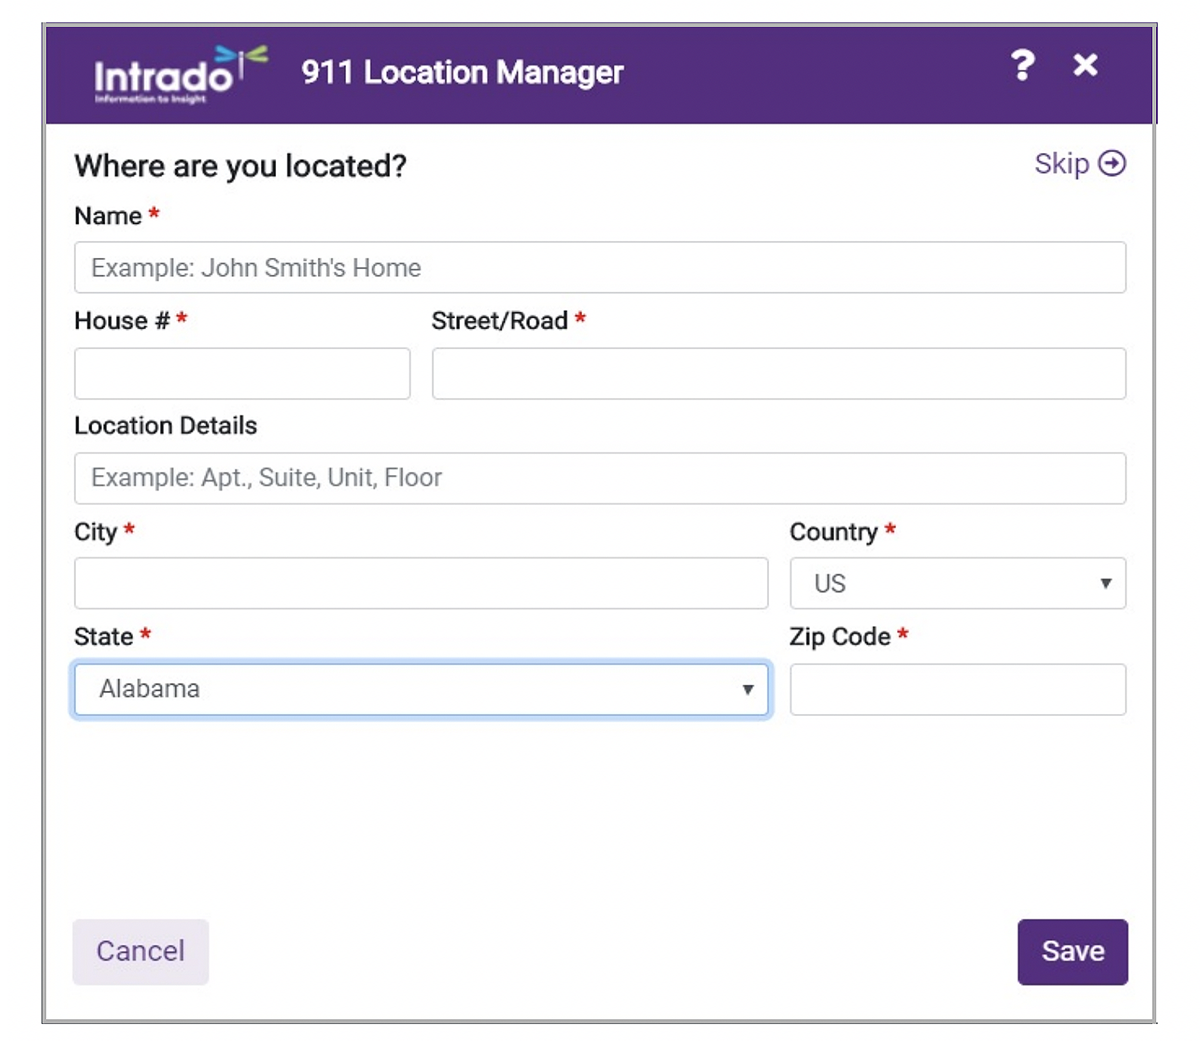 Screenshot of the Intrado E911 location manager screen where you enter your current location. Select the image to enlarge.